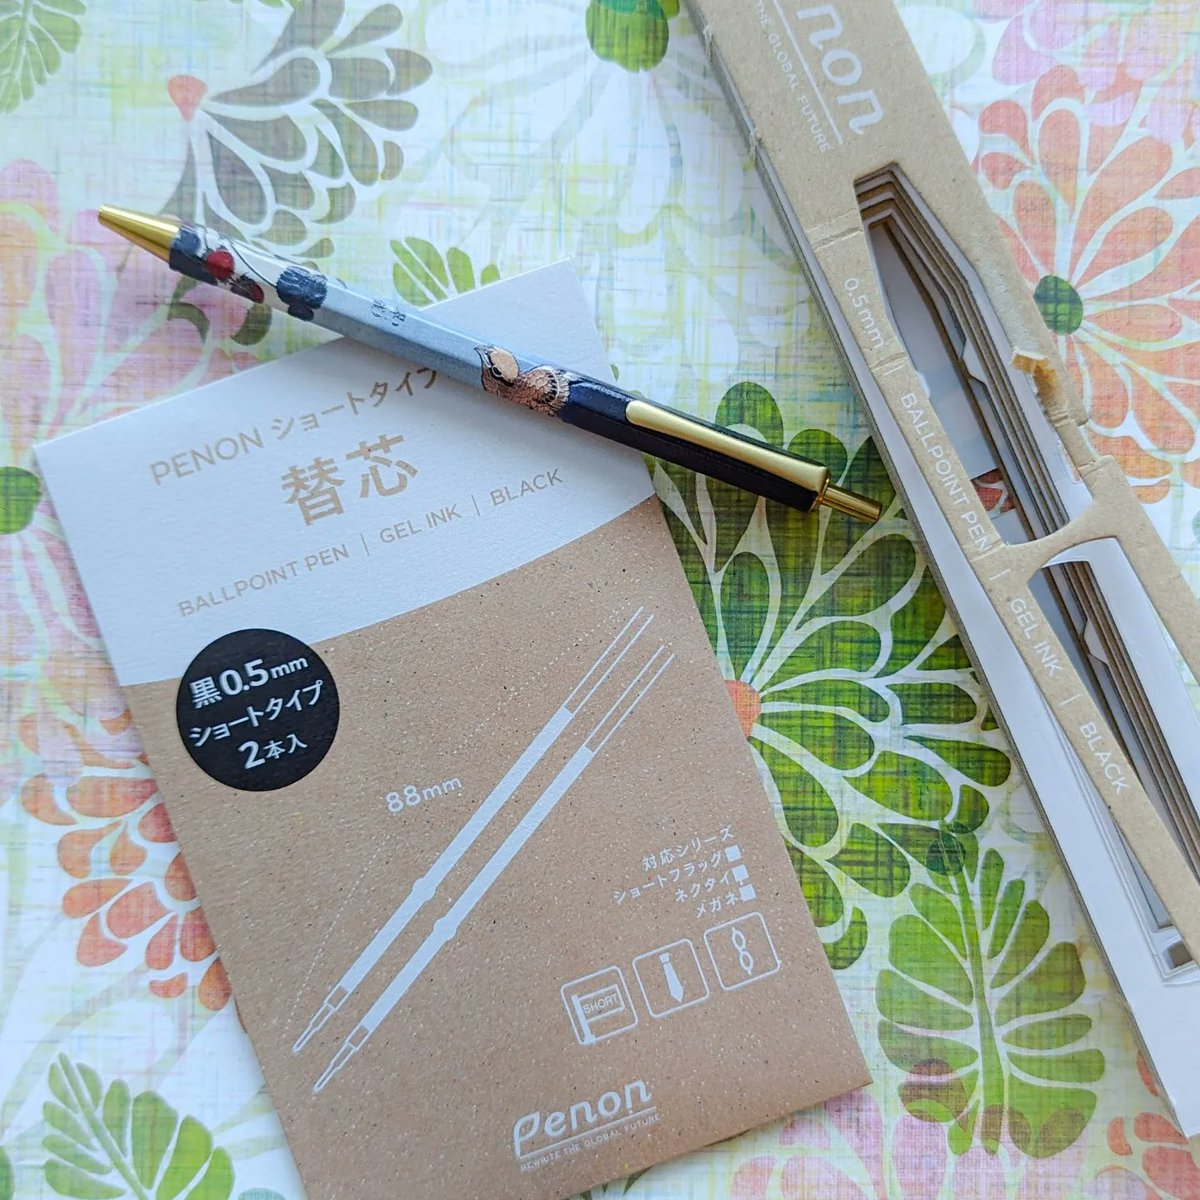 It's #watsenotwednesday. My favourite #lowwaste souvenir from Japan is this pen with a Hokusai Birds and Flowers print on it. The packaging was completely paper and I was able to purchase extra ink replacements as well! 
#lowwastetravel #zerowastegoals